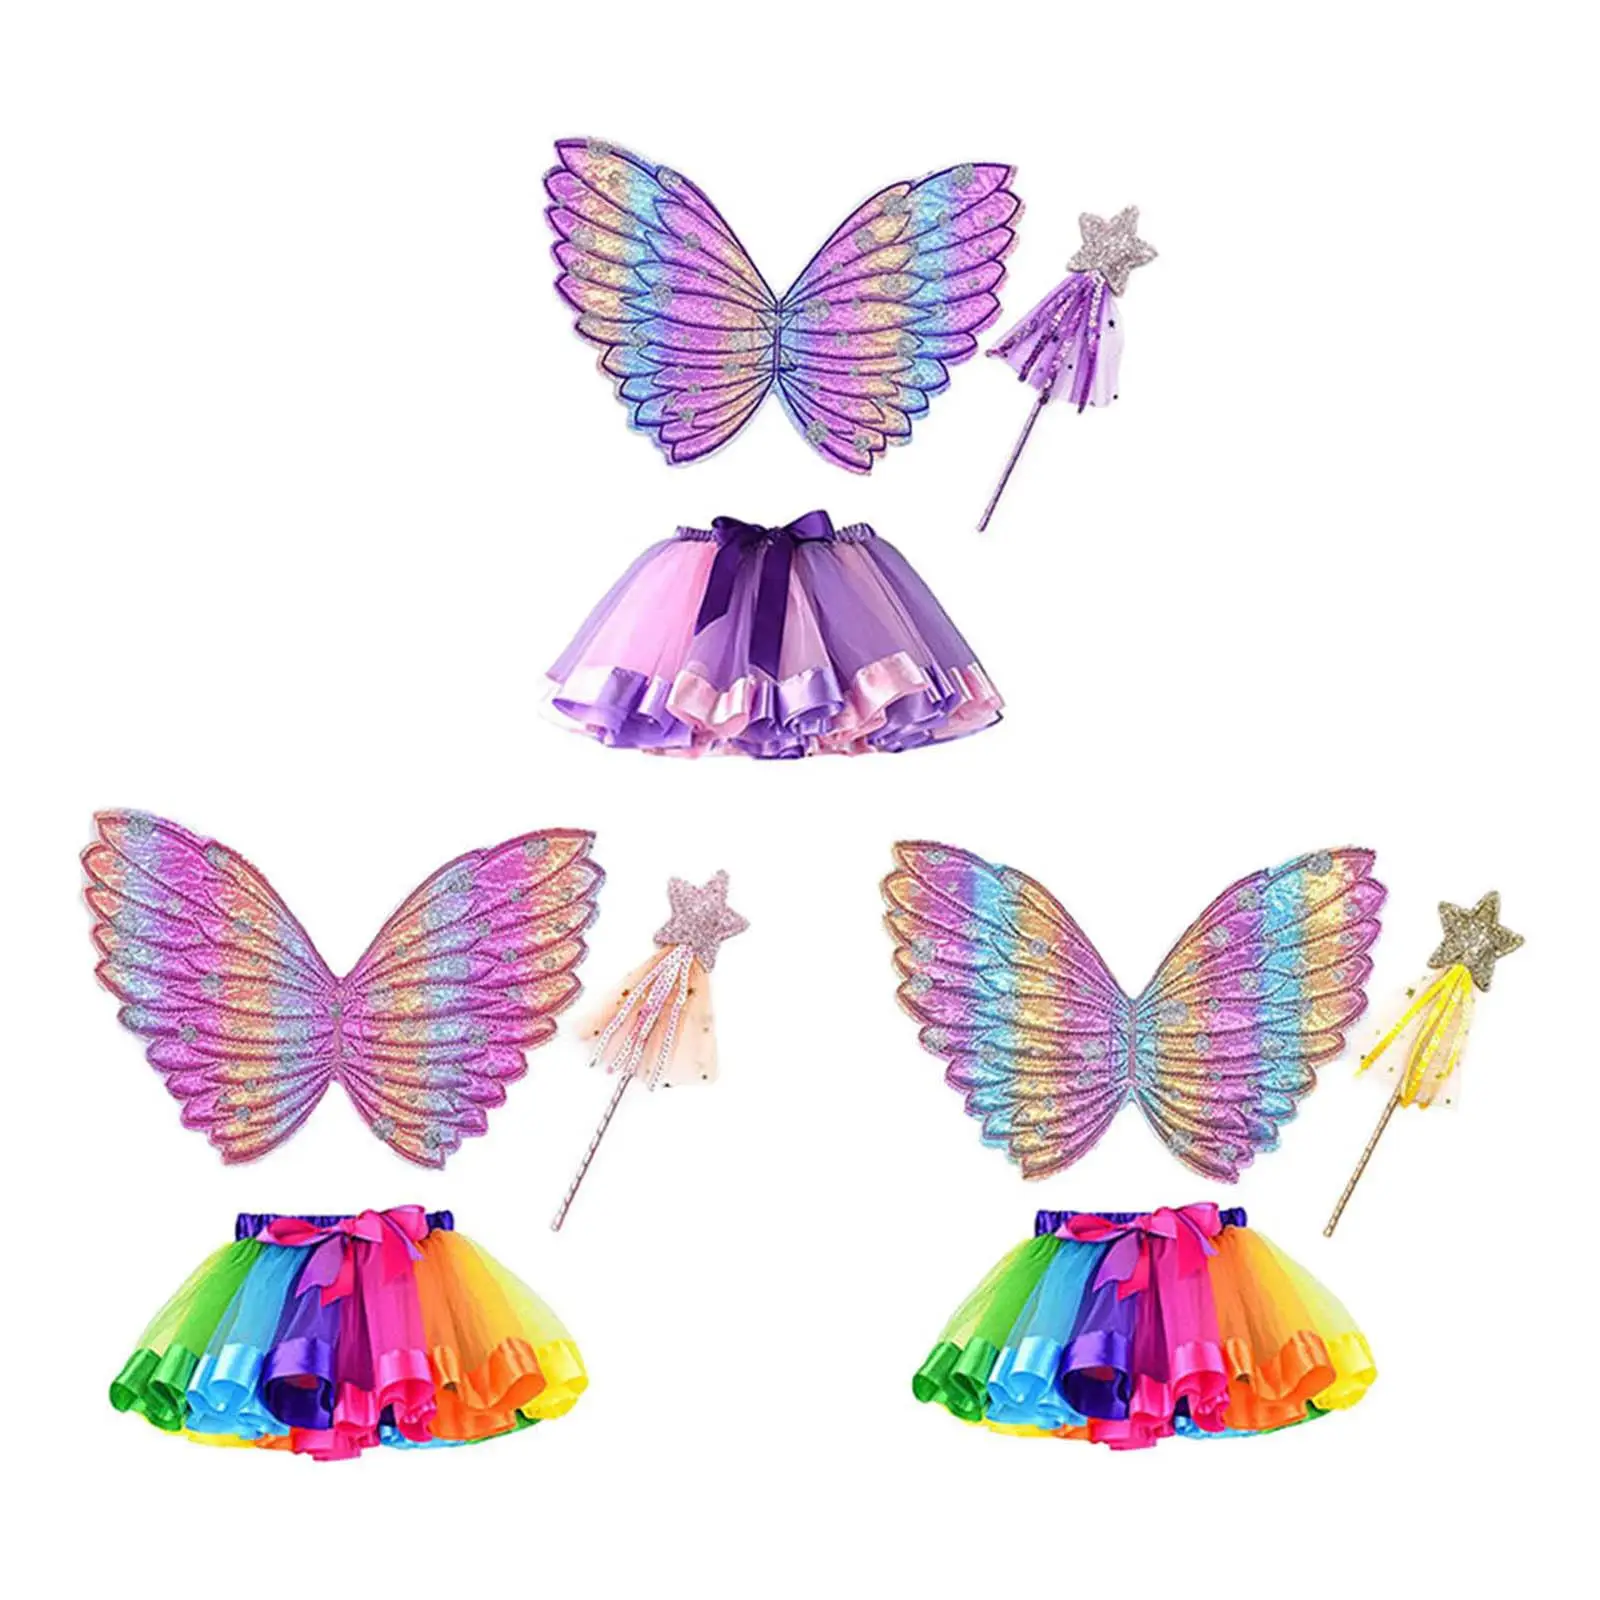 Girls Fairy Costume Tutu Dress Princess Cosplay Christmas Party Fancy Dress Up Role Play Outfits Photo Props